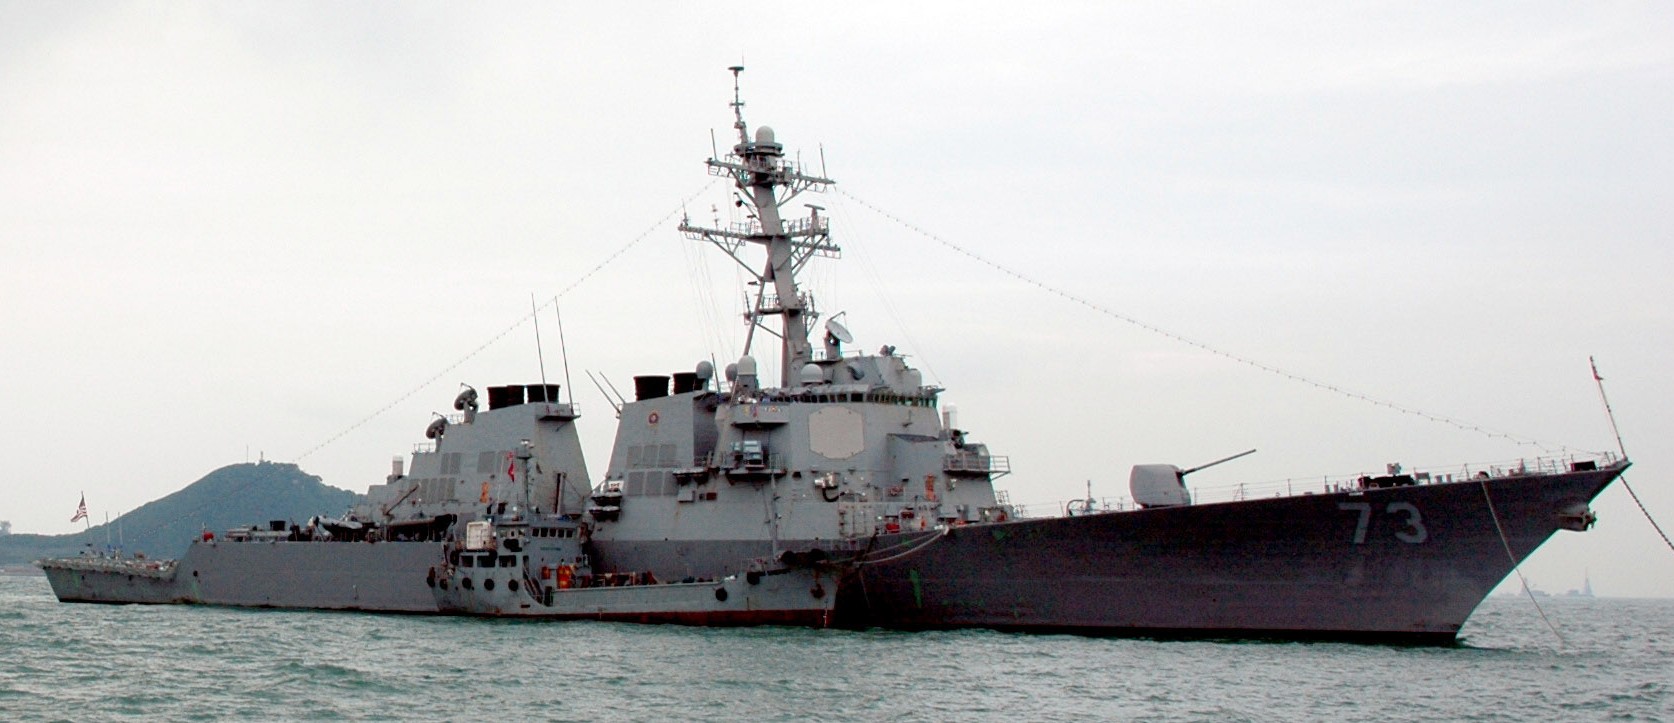 ddg-73 uss decatur guided missile destroyer arleigh burke class aegis bmd 38 hong kong